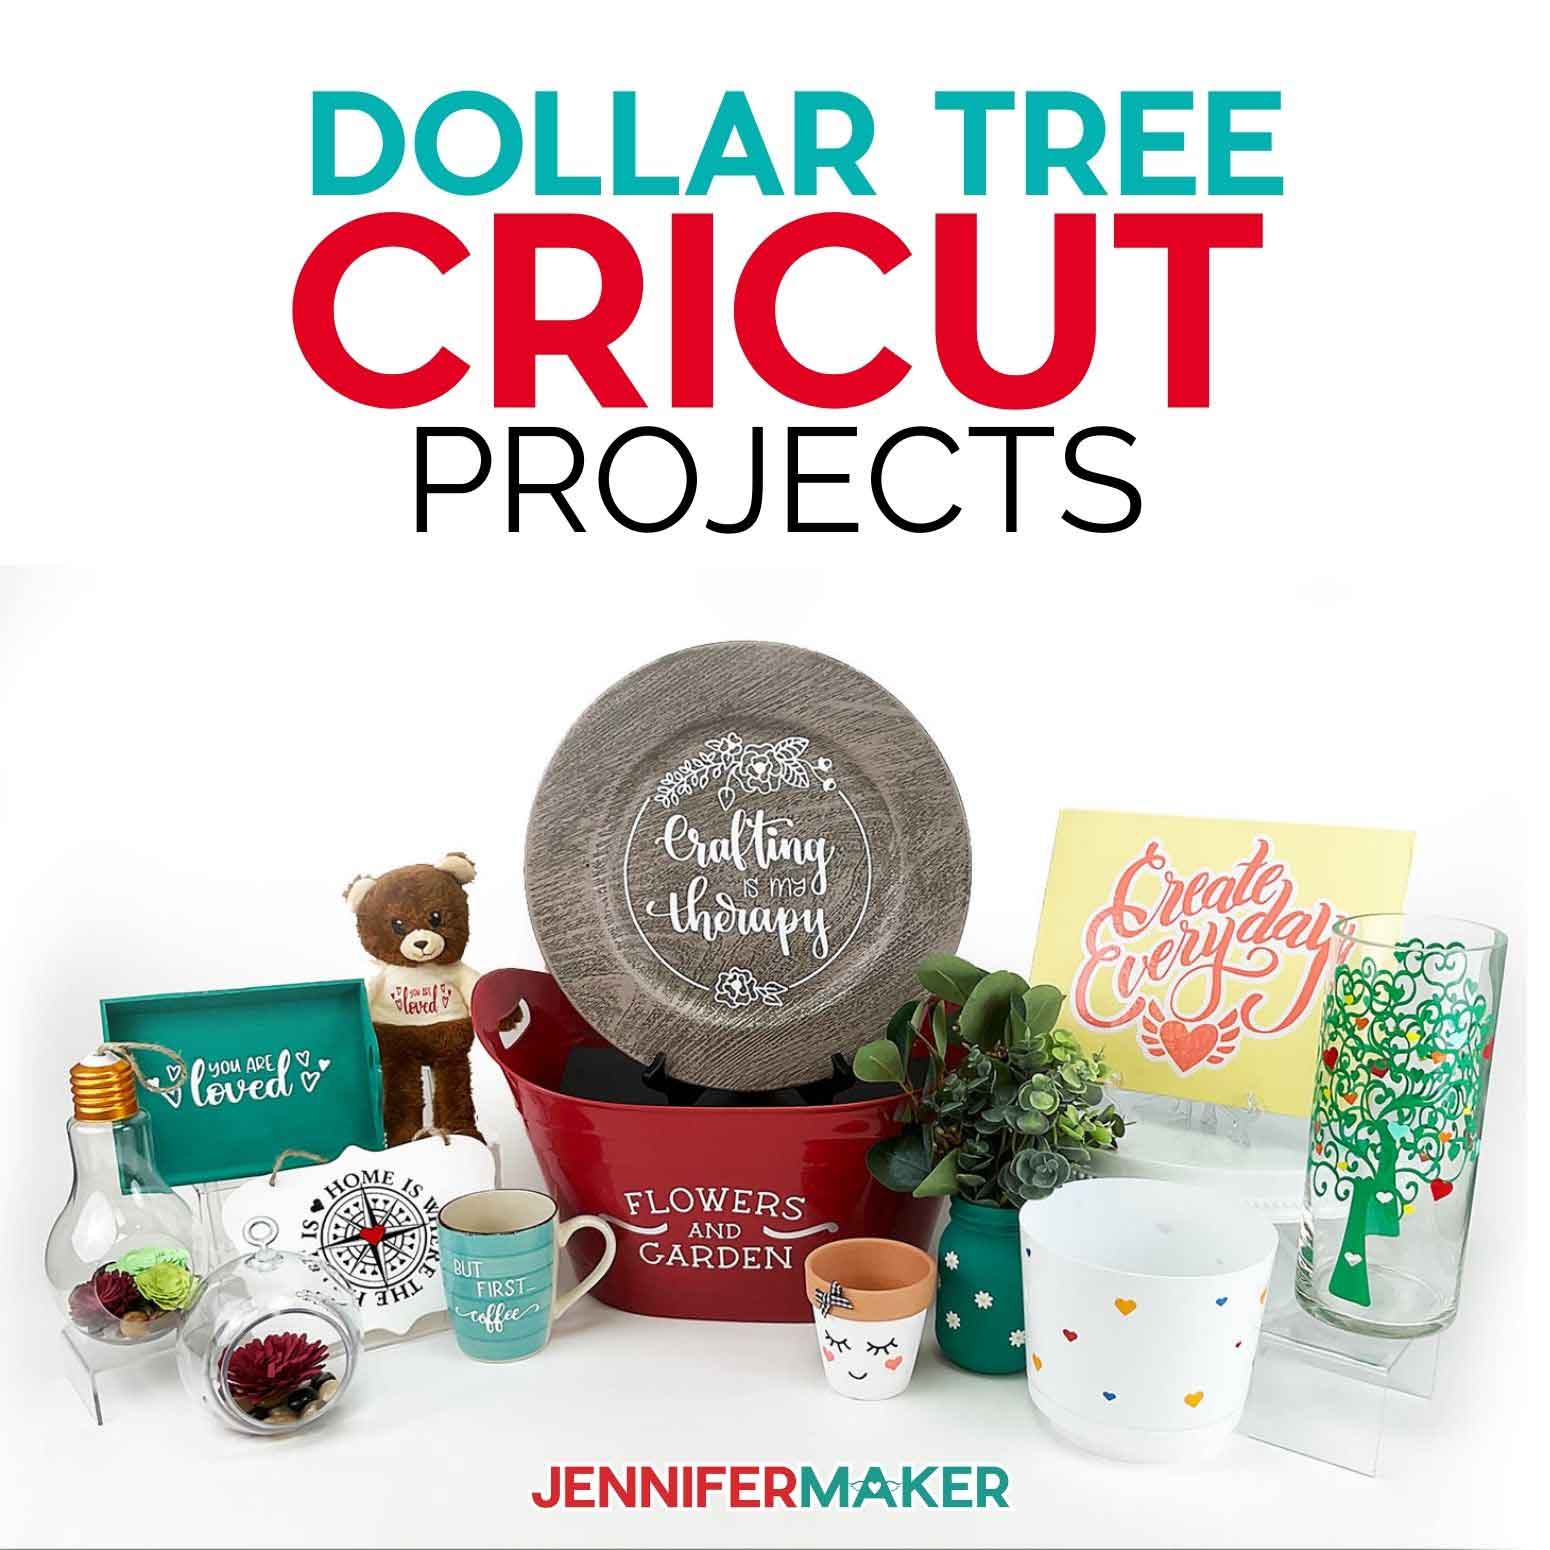 Dollar tree items with vinyl decorations made on the Cricut under the phrase Dollar Tree Cricut Projects.